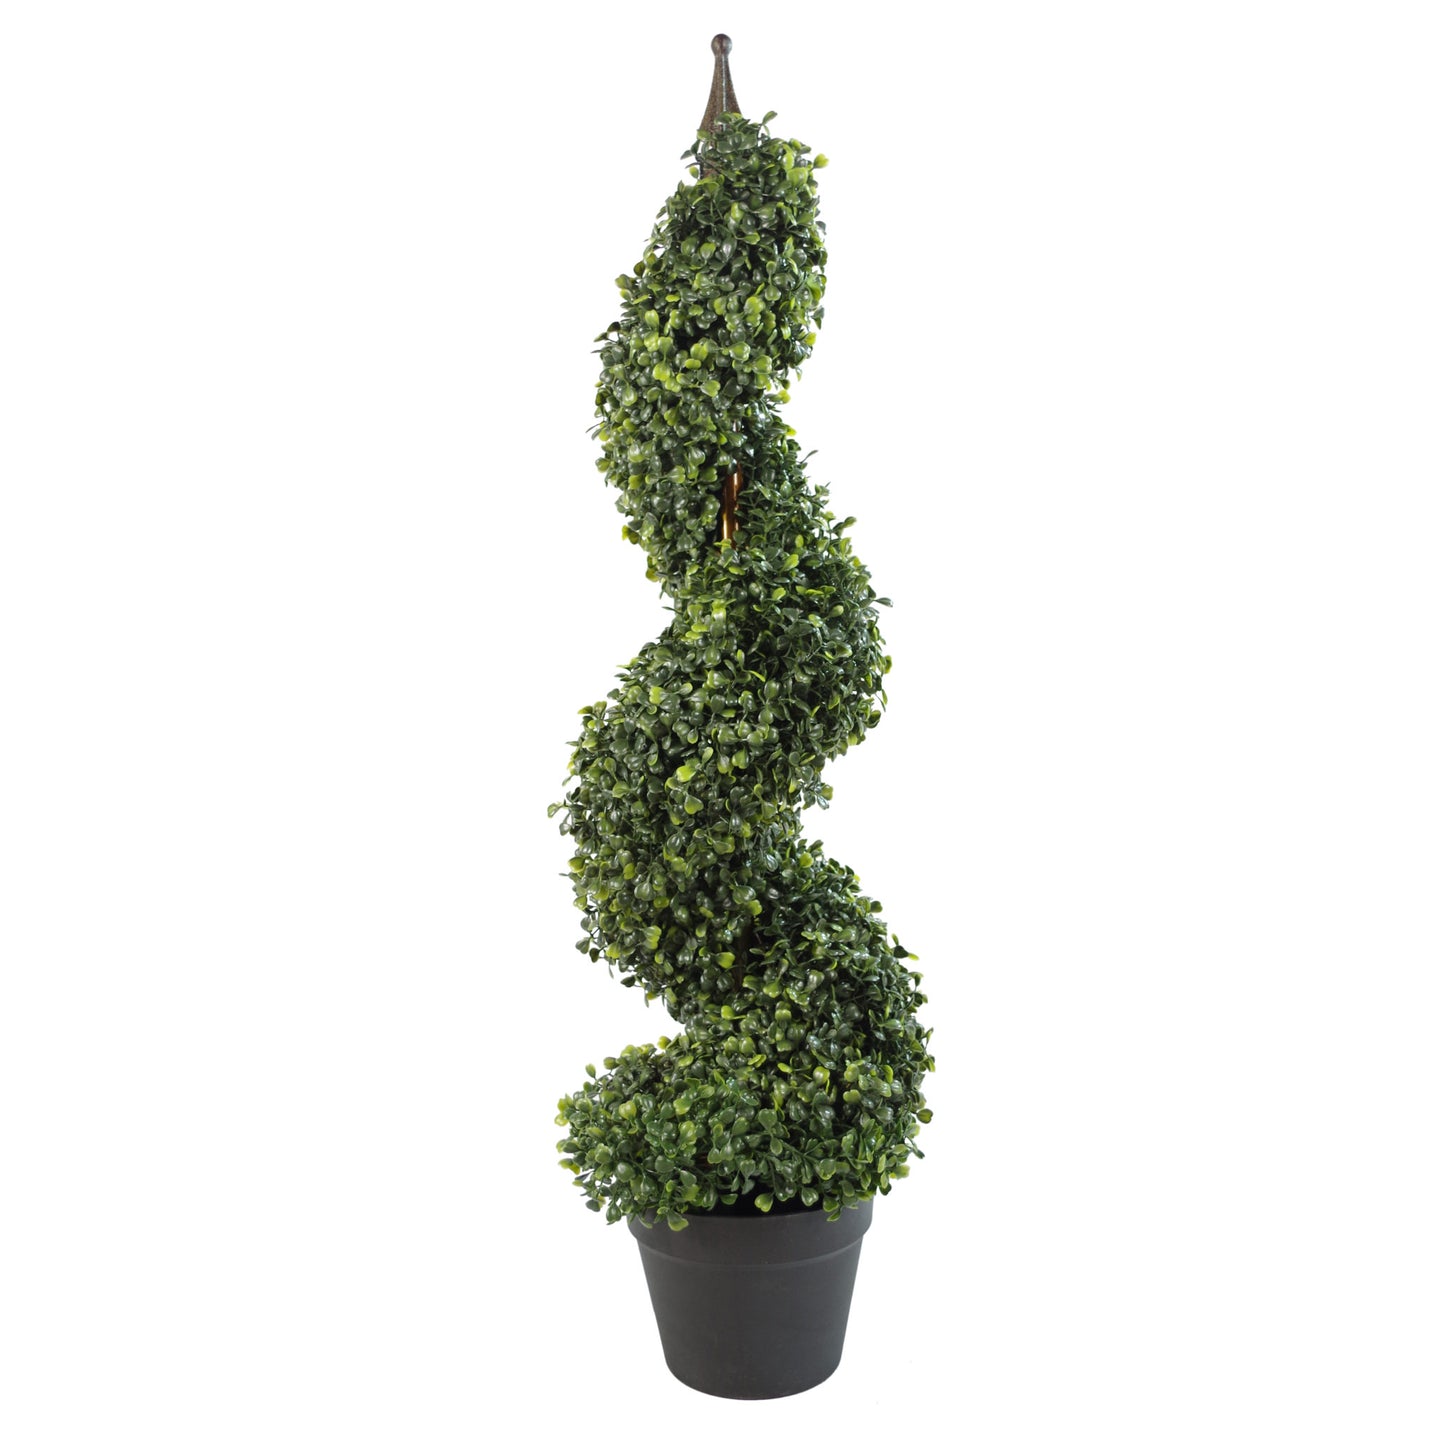 Pair of Artificial Topiary Spiral Boxwood Trees 90cm